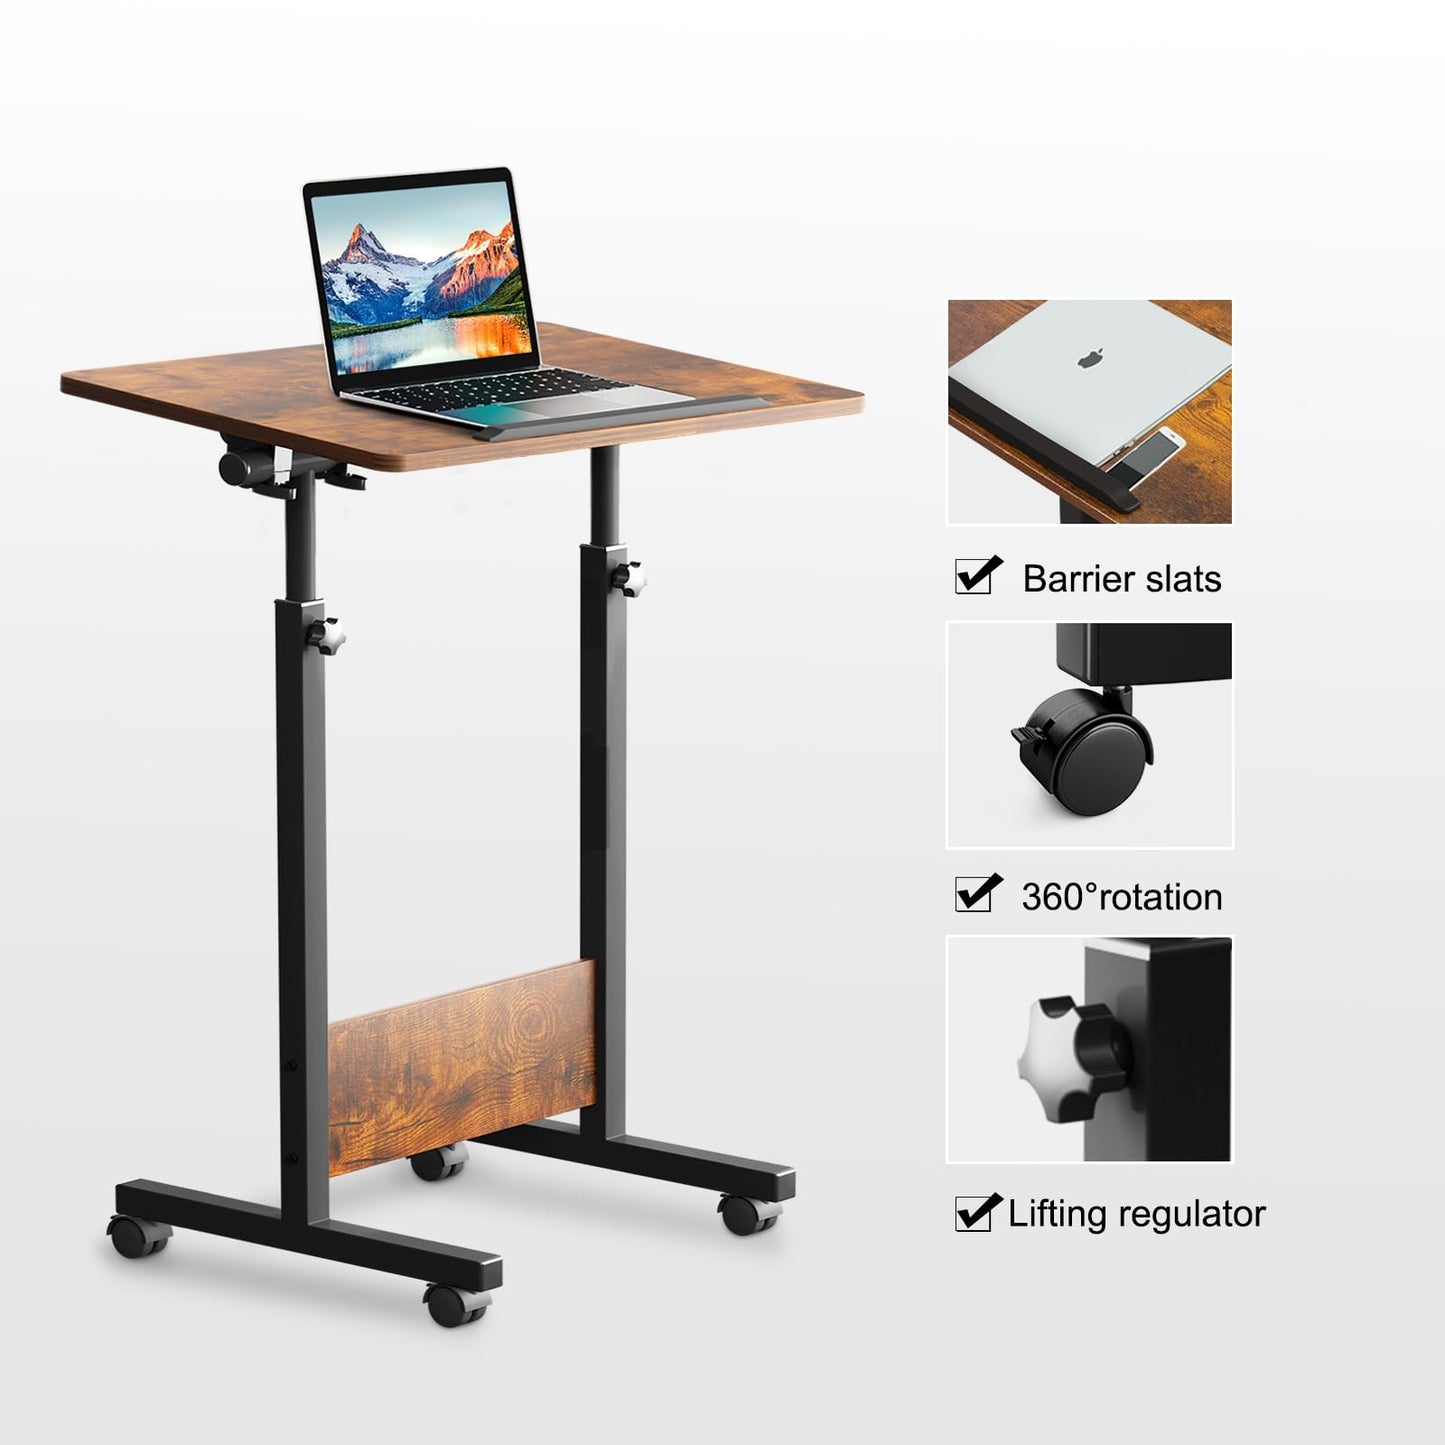 KOUPA Height Adjustable Mobile Standing Desk 16×24 in,360° Flip Desk Stand Desk Home Office Table Standing Desk for Small Space Offices,Easy to